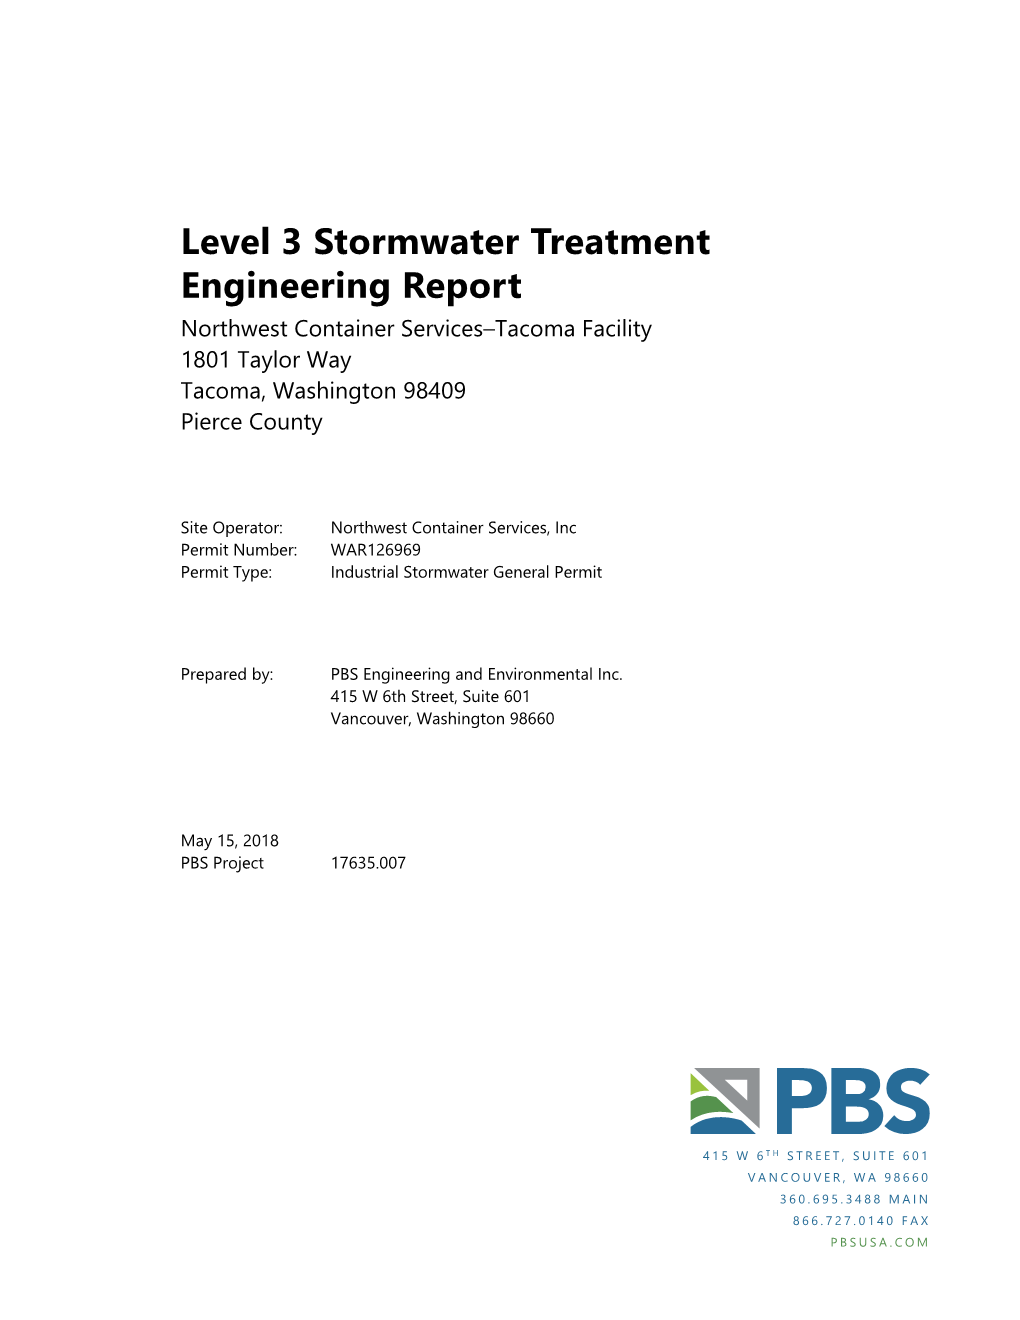 The Stormwater Management Stormfilter® for the Removal of SIL-CO-SIL 106, a Standardized Silica Product: ZPGTM Stormfilter Cartridge at 28 L/Min (7.5 Gpm)